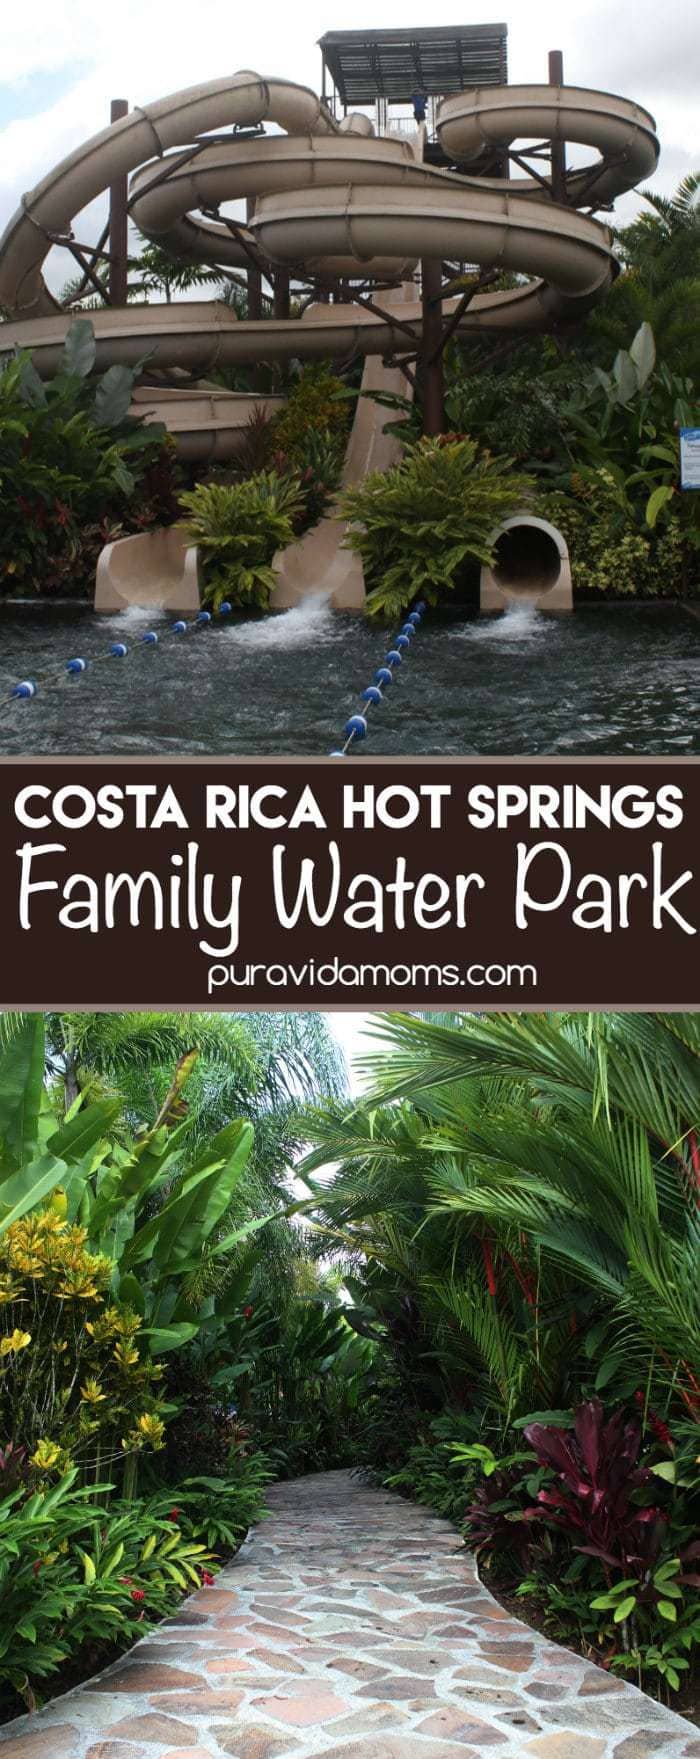 Costa Rica Hot Springs Family Water Park